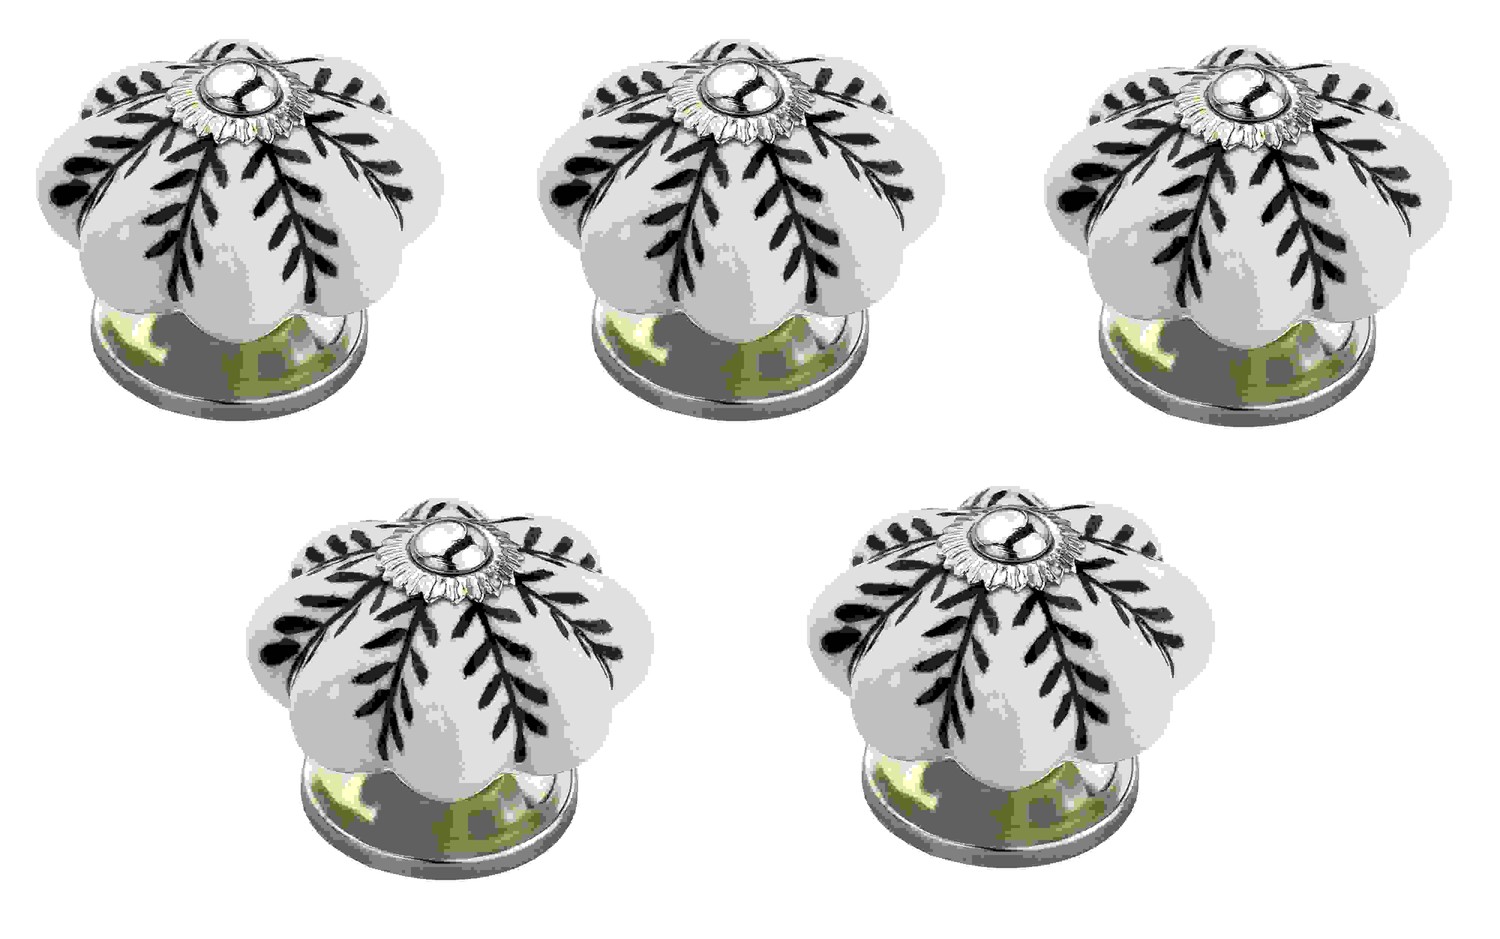 Flowered 1-7/10 in. (43mm) Black & White Cabinet Knob (Pack of 5)